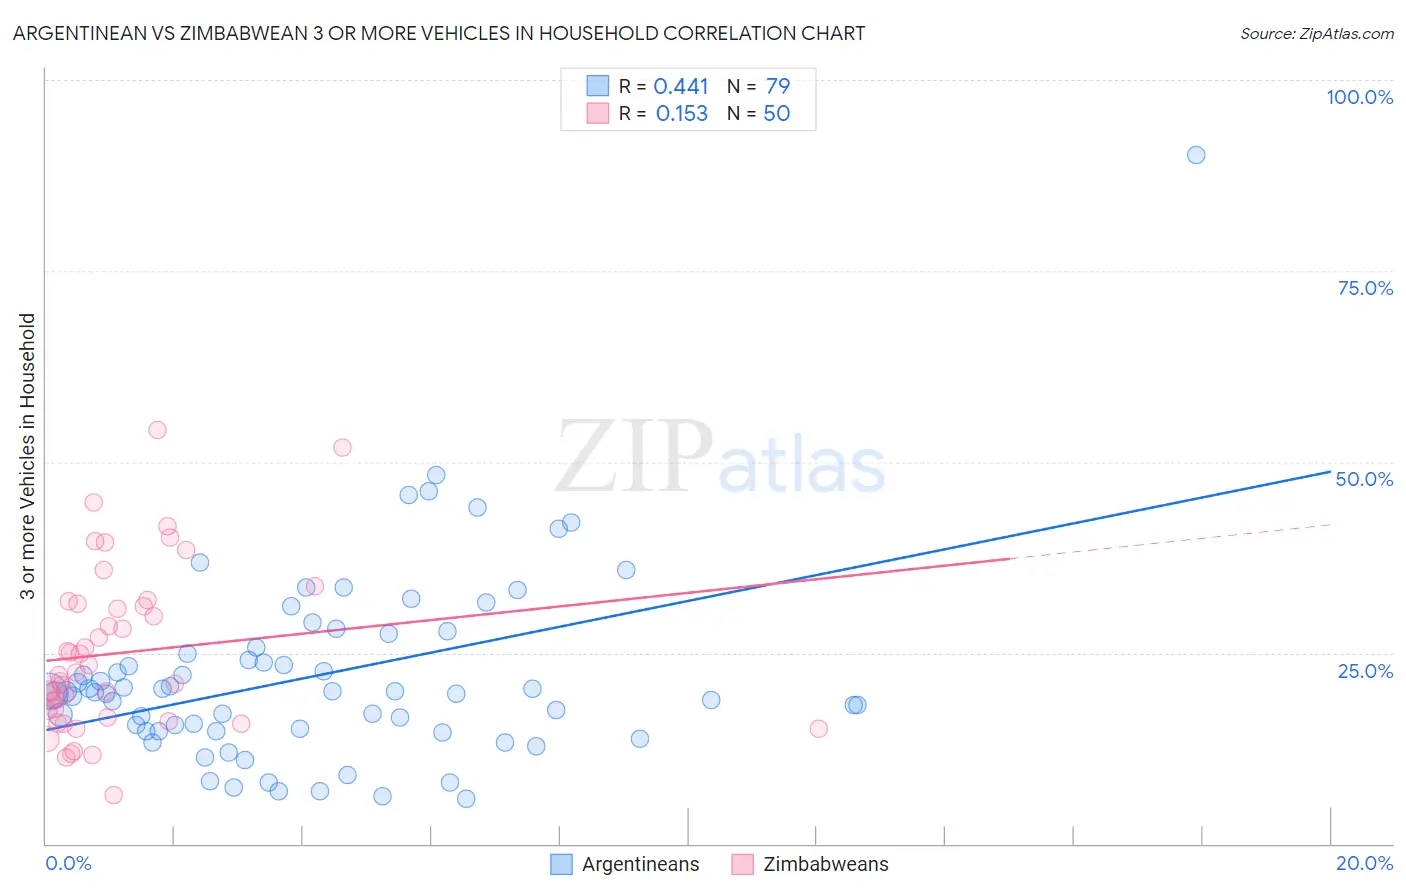 Argentinean vs Zimbabwean 3 or more Vehicles in Household